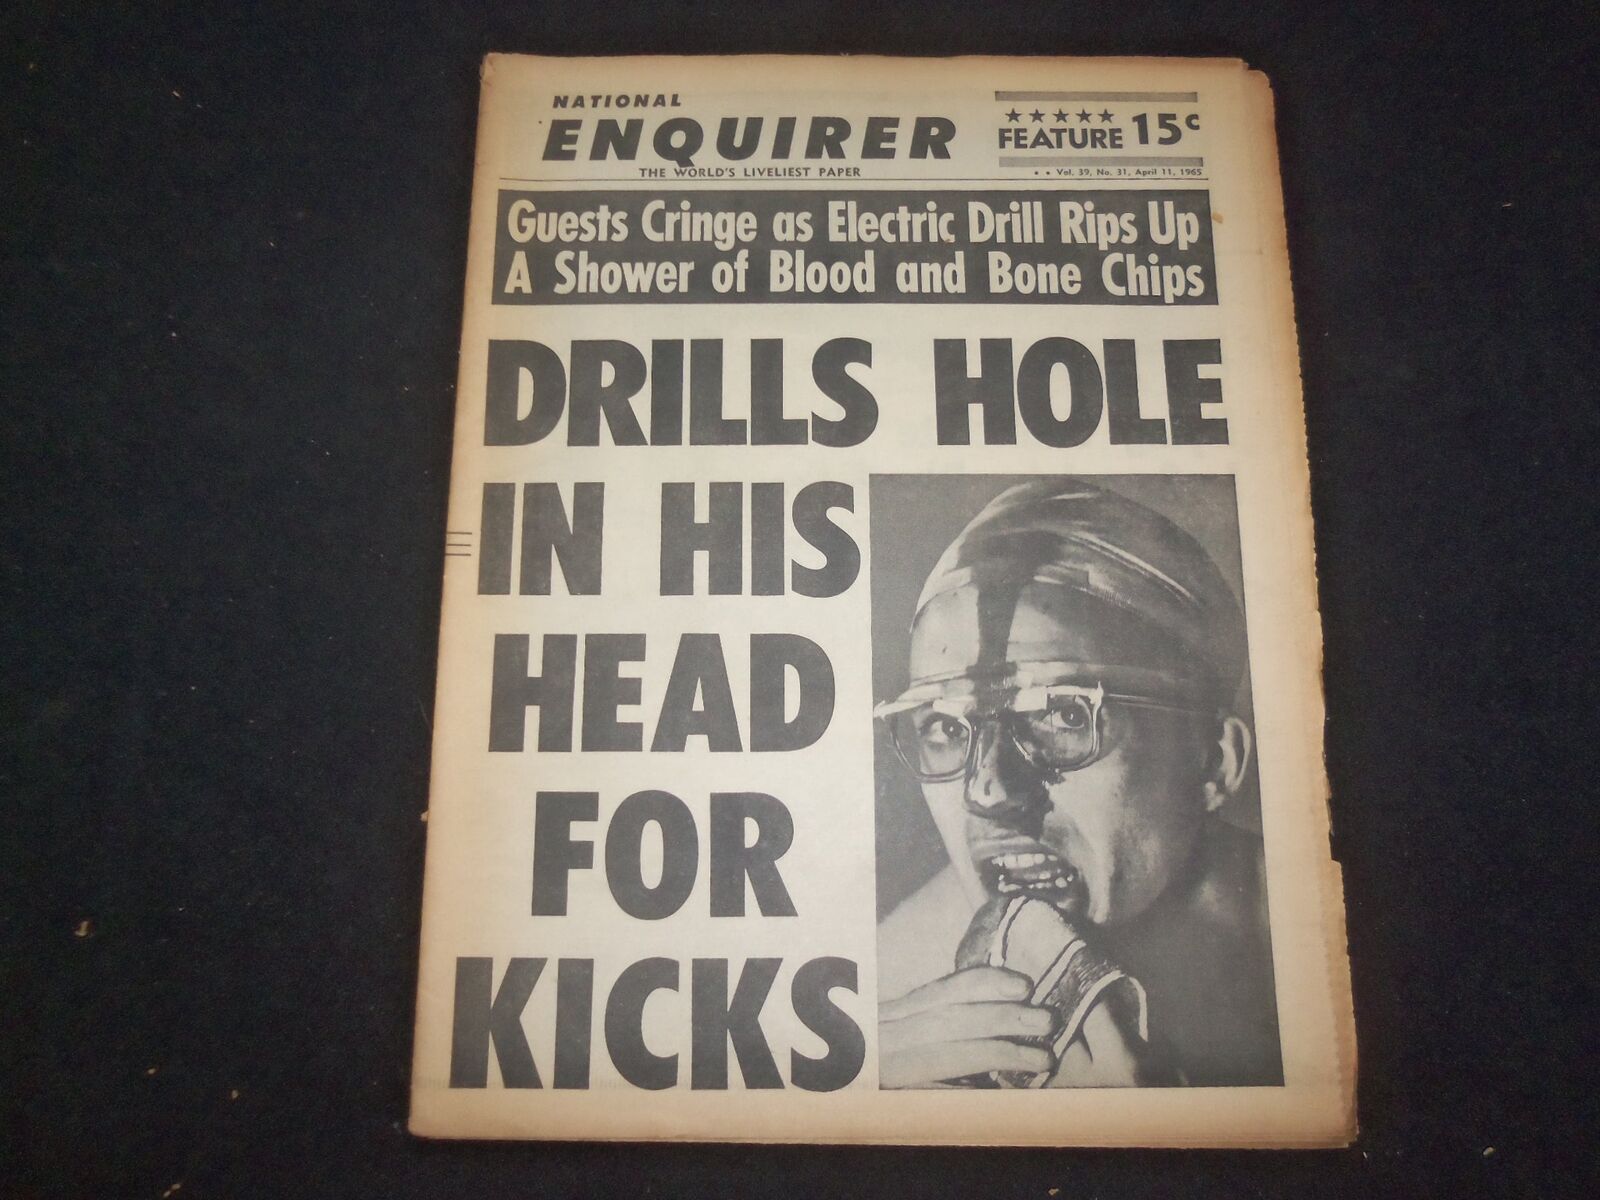 1965 APRIL 11 NATIONAL ENQUIRER NEWSPAPER-DRILLS HOLE IN HEAD FOR KICKS- NP 7381